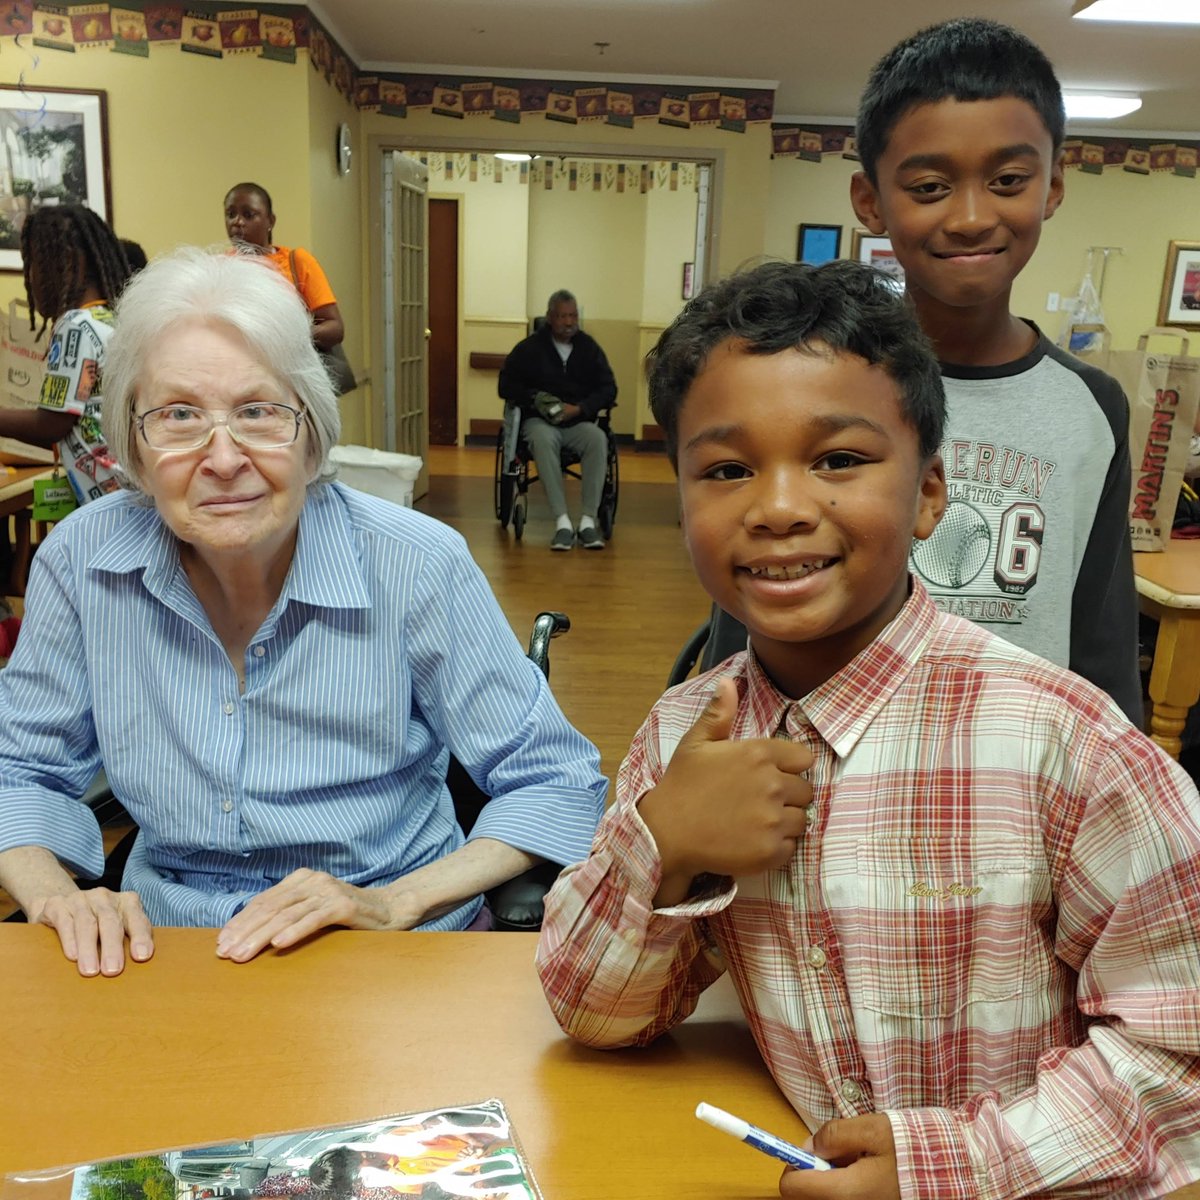 Pictures from the field trip to Battlefield Park Healthcare (nursing home) with Walnut Hill Elementary School Gifted Students. #Petersburg Public Schools